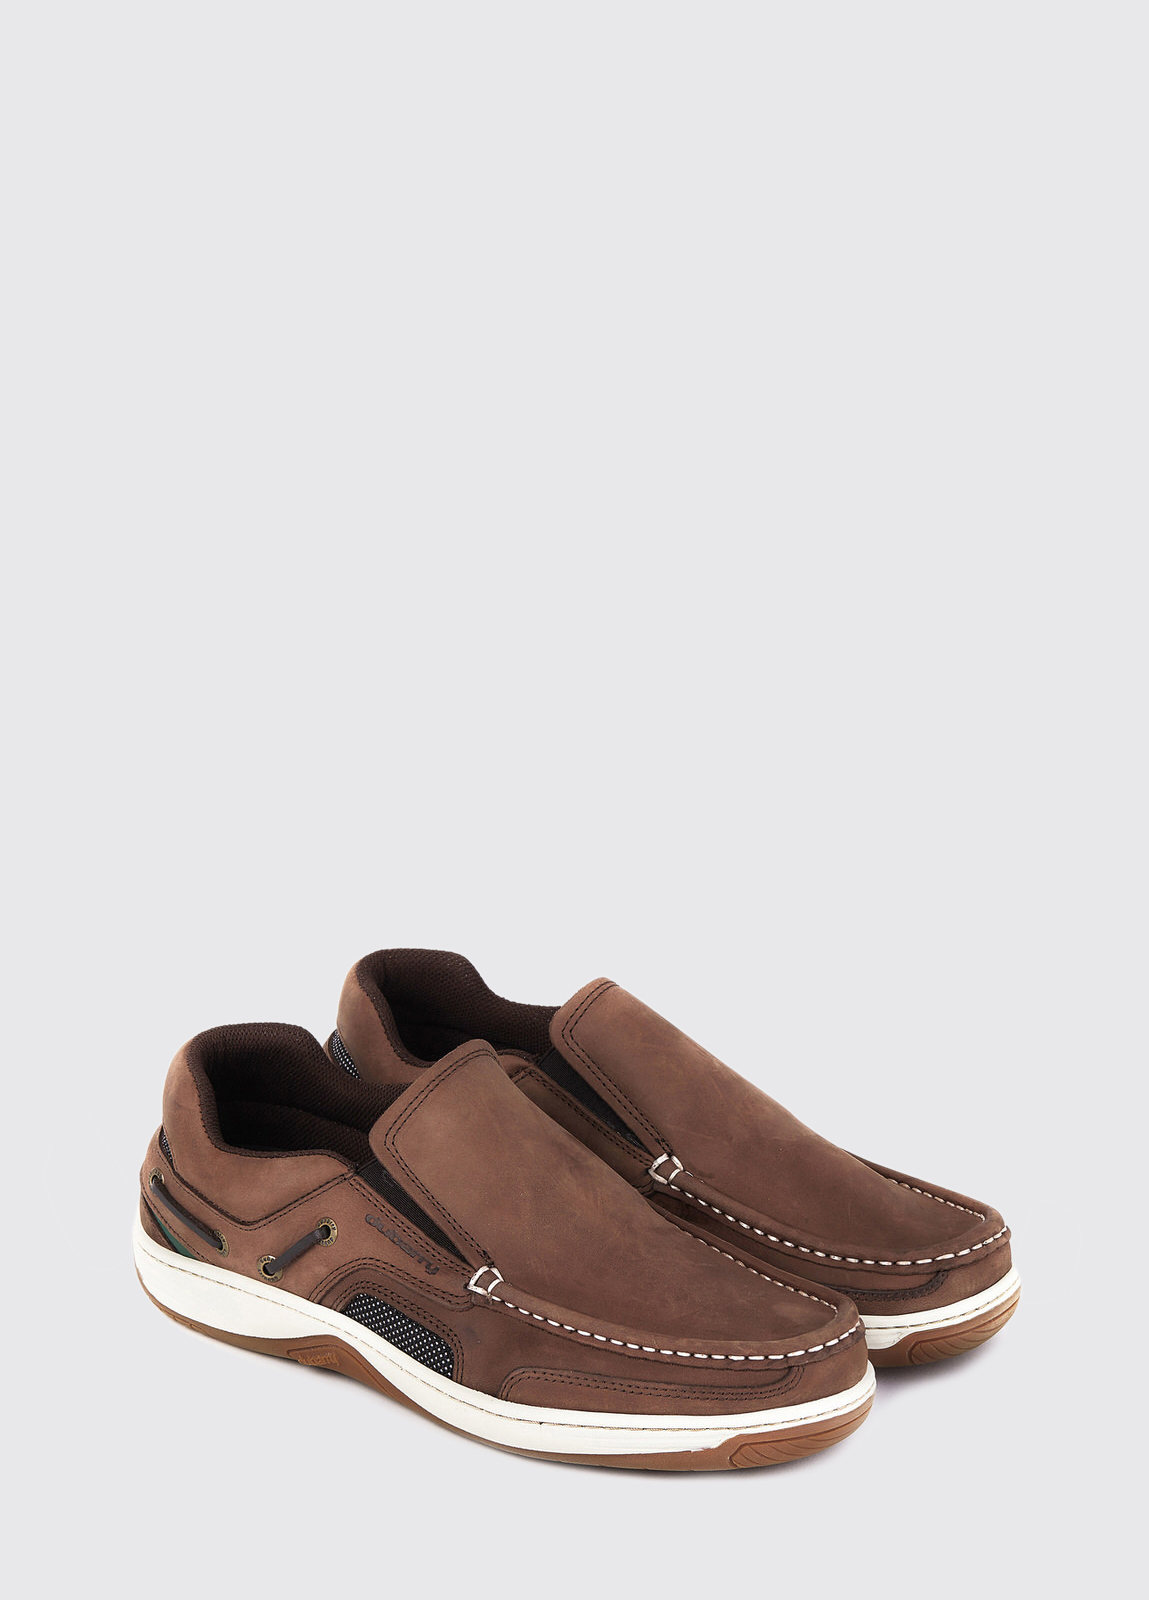 sailing loafers